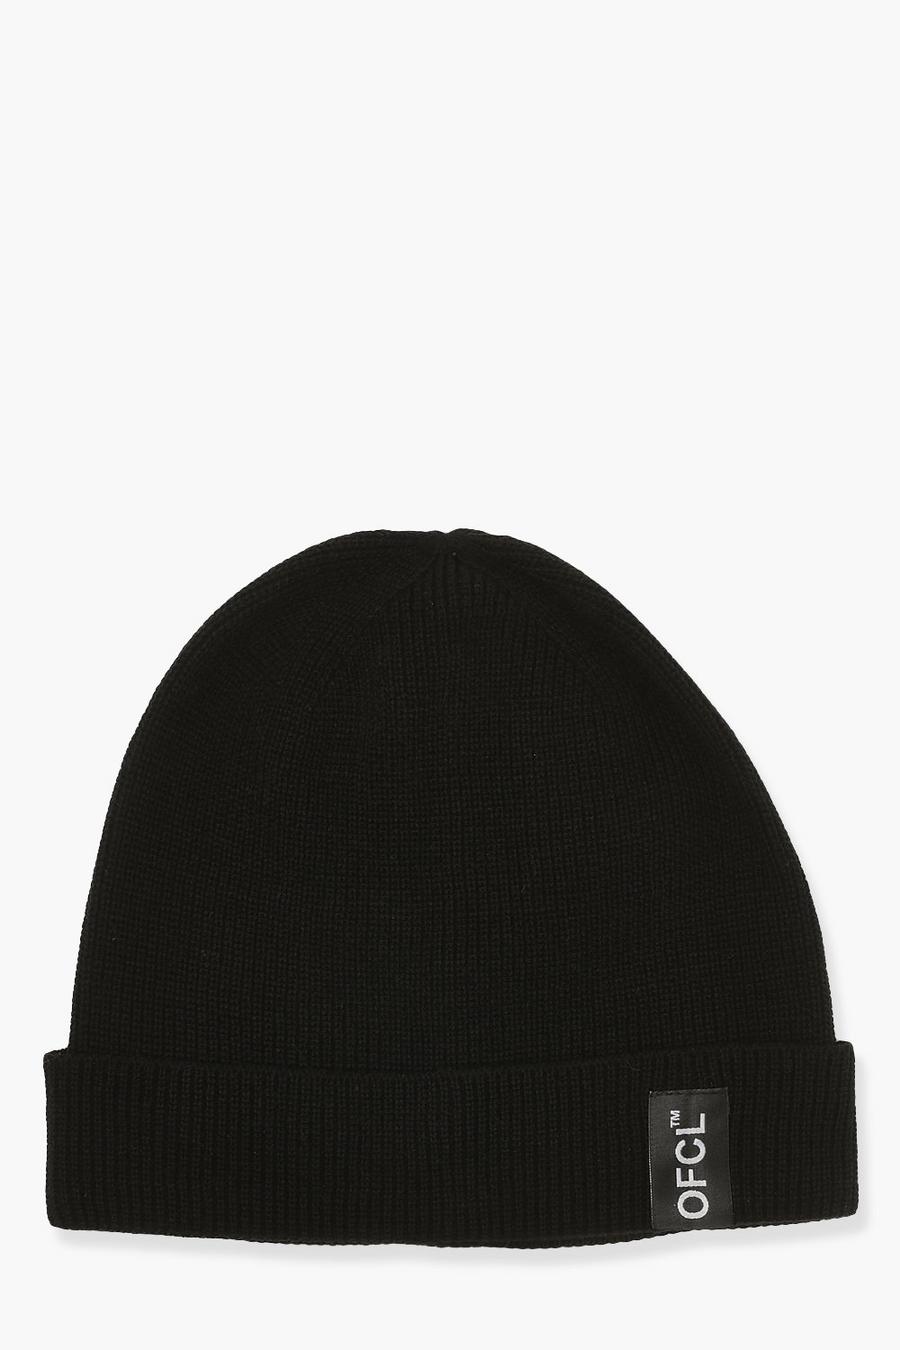 Black Ofcl Woven Tab Rib Beanie image number 1